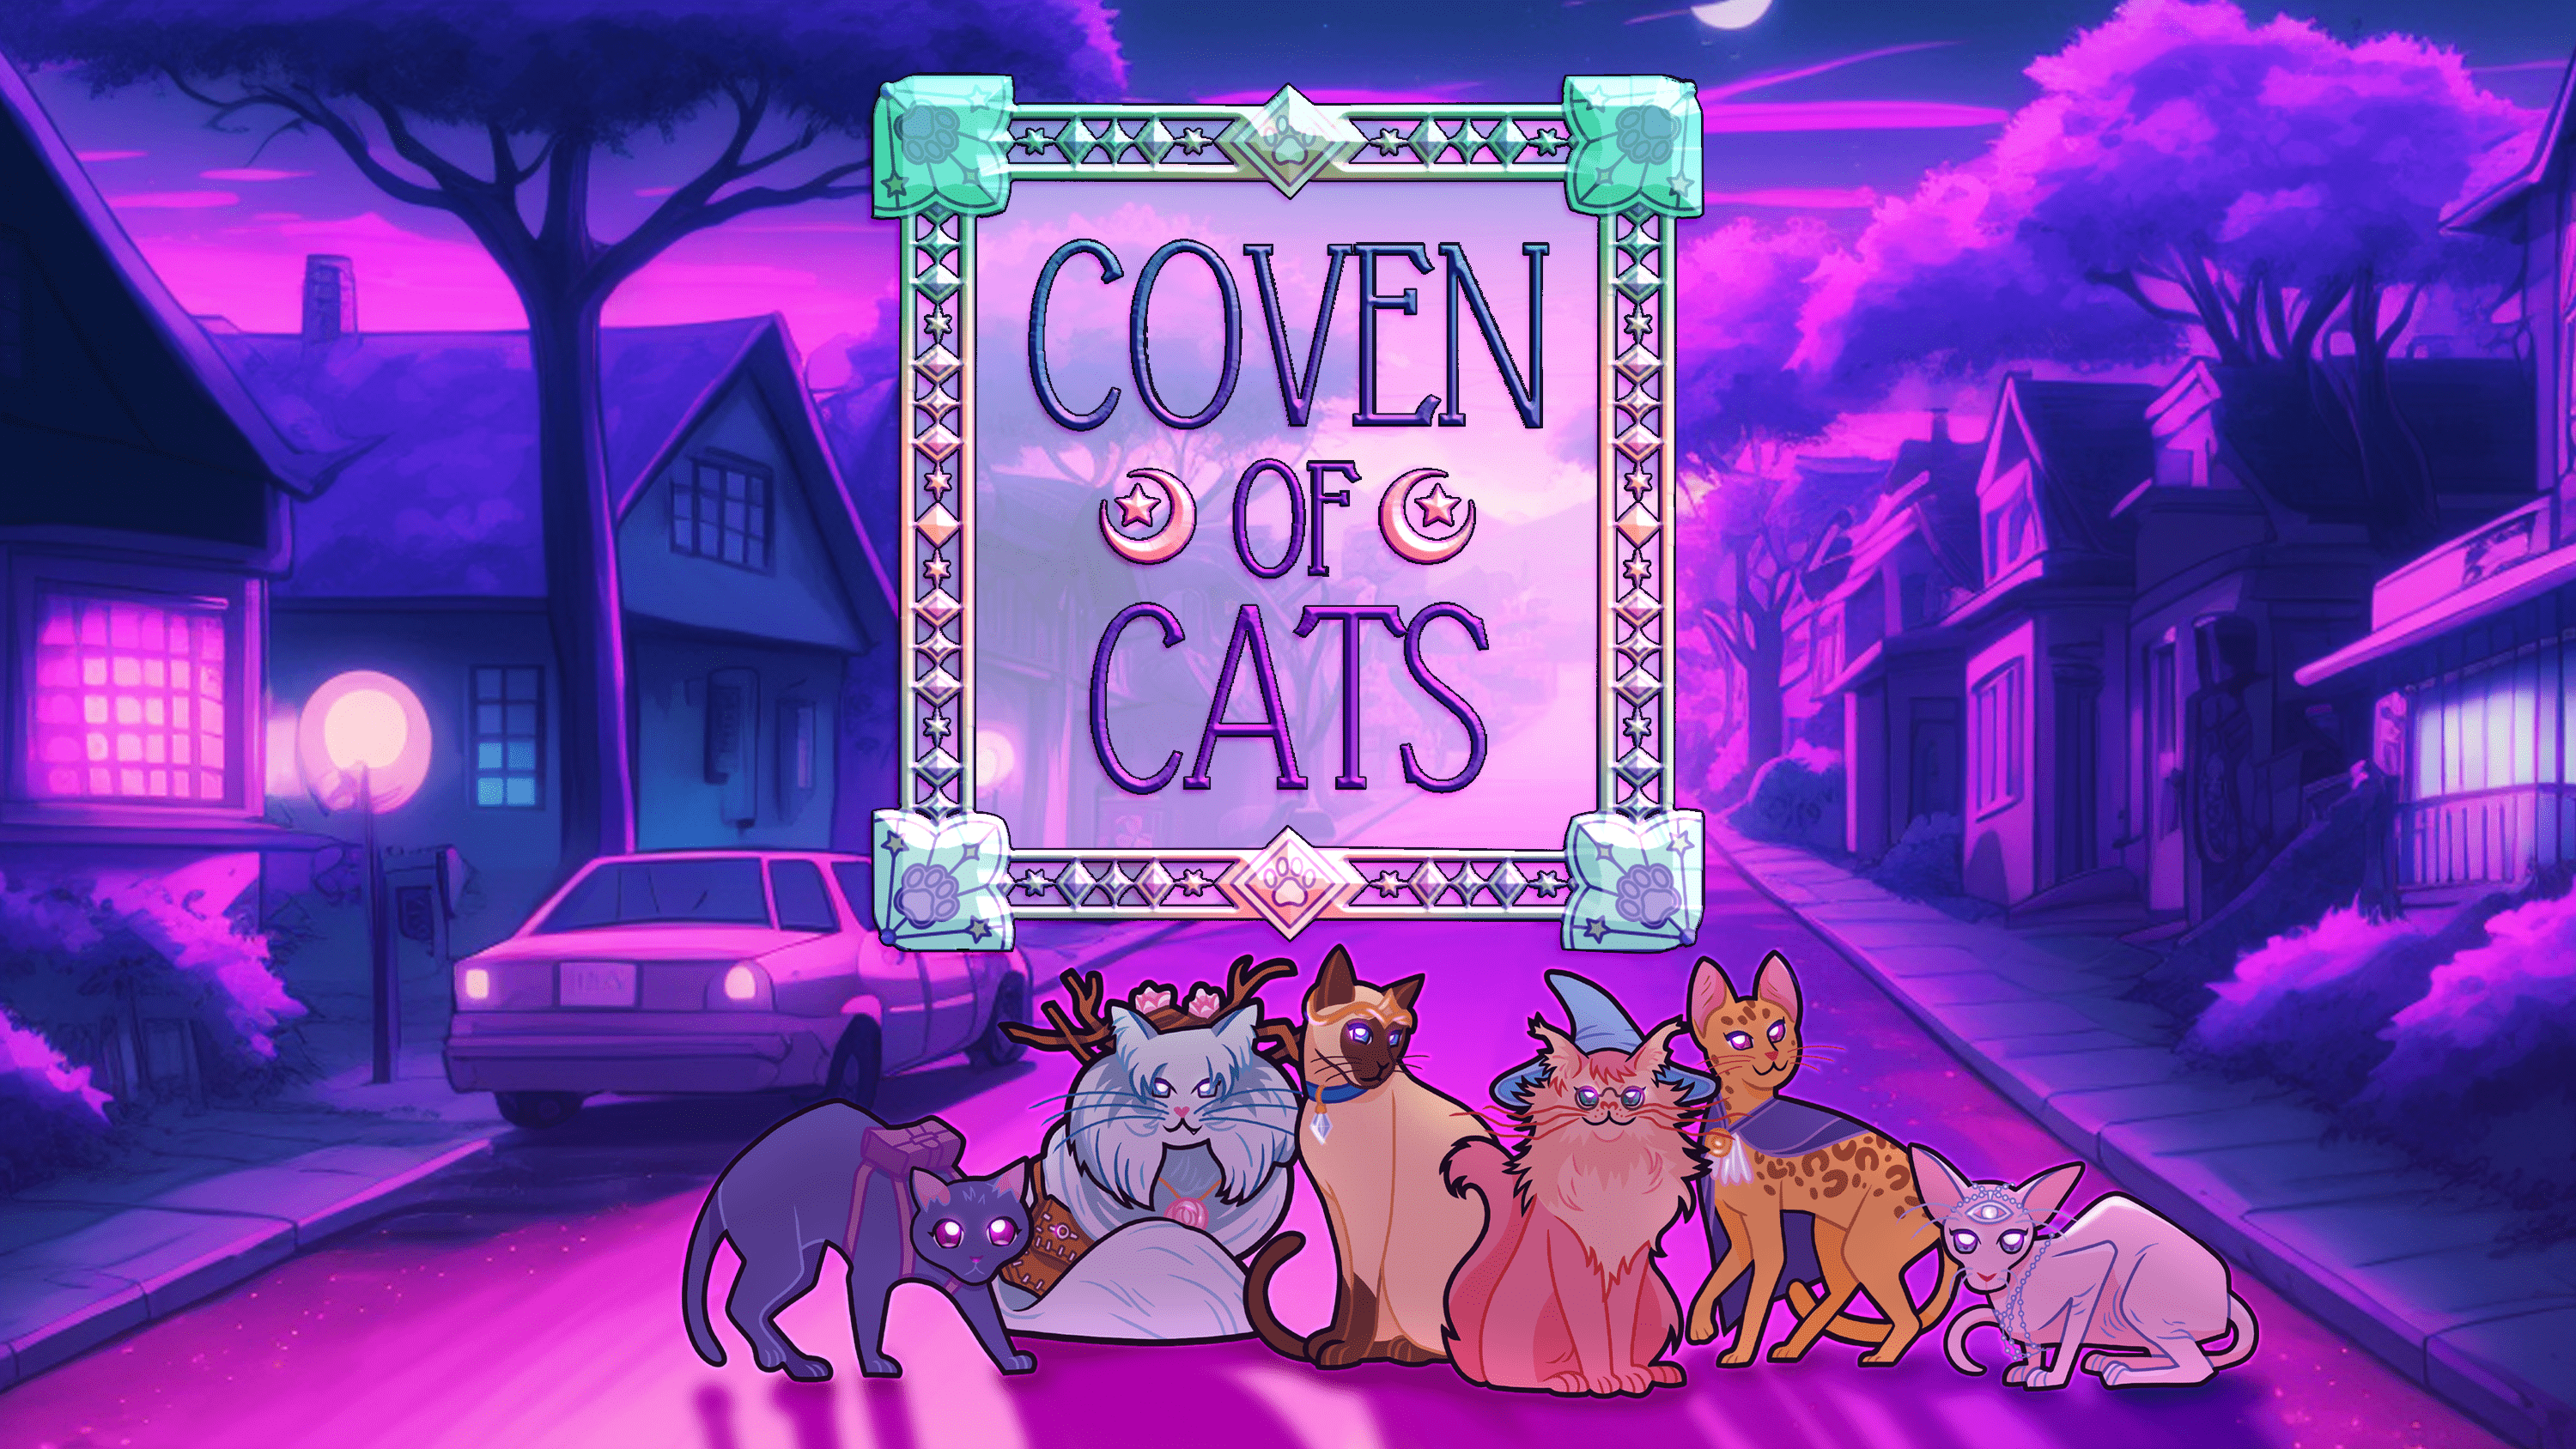 Moonlit Magical Meowstery! 🐈 Find Your Way Home in this Modern Mystical Mini-Campaign